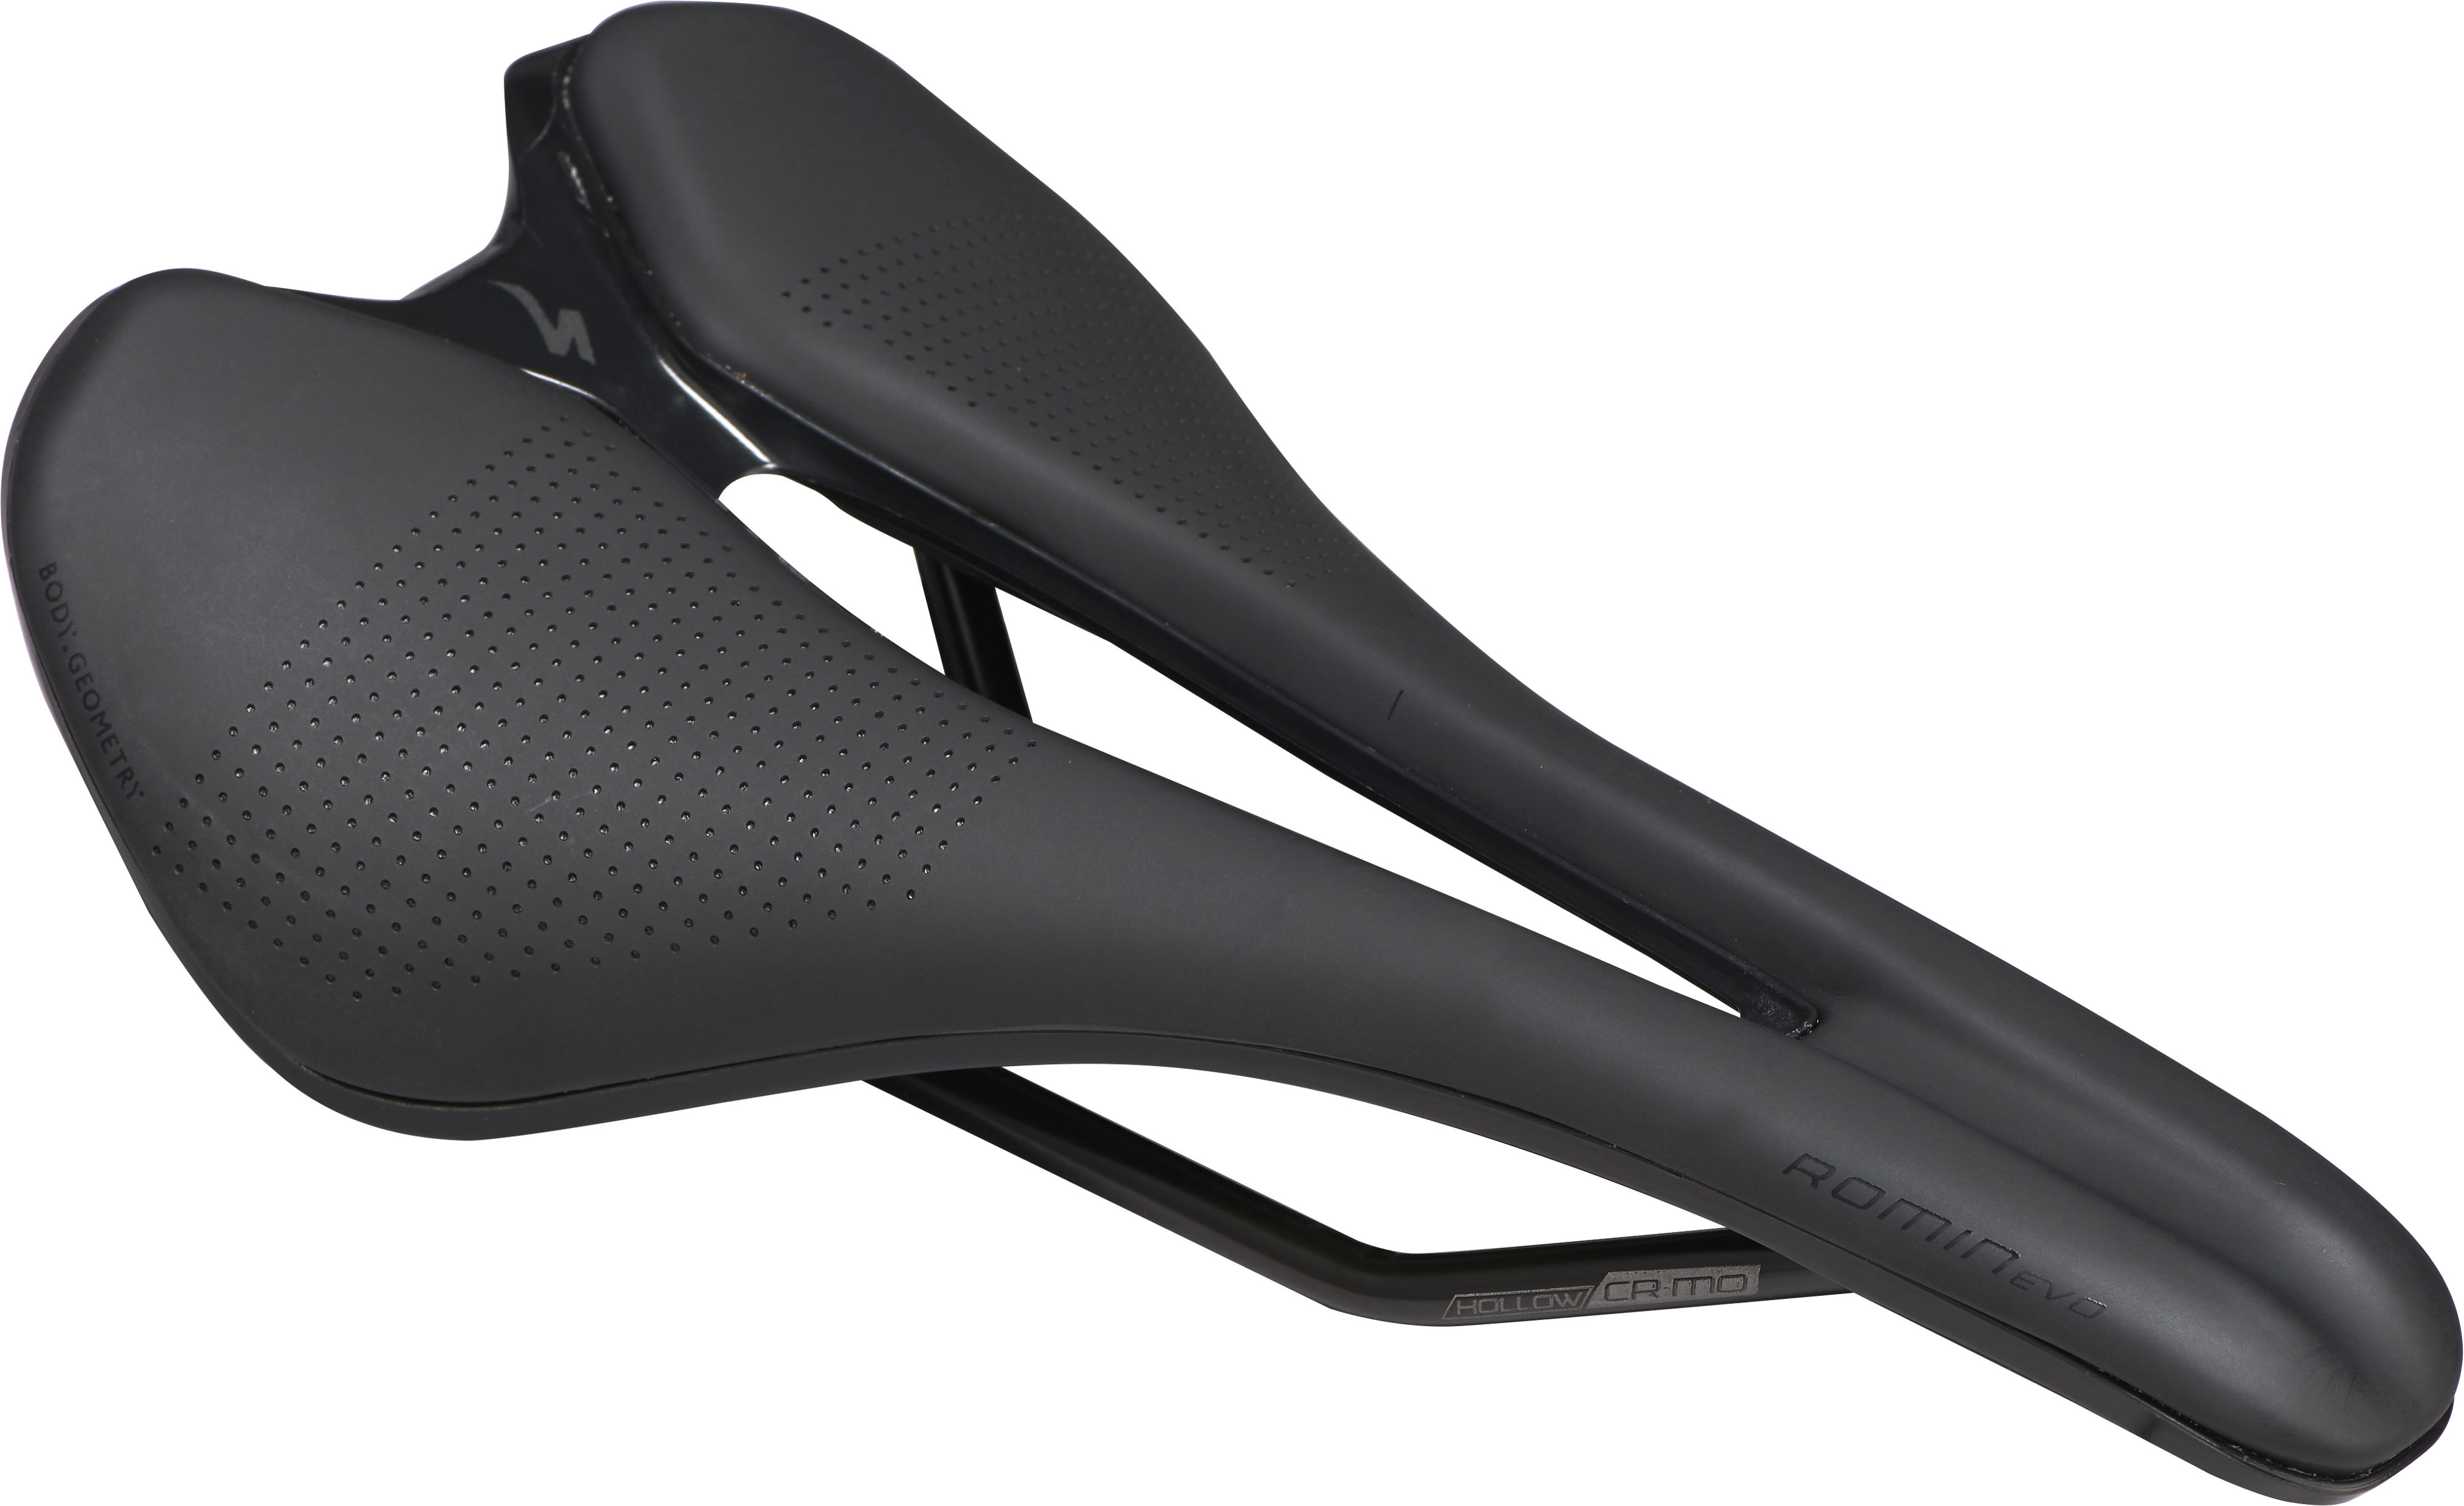 Specialized  Romin Evo Comp Gel Road Cycling Saddle in Black 143MM Black